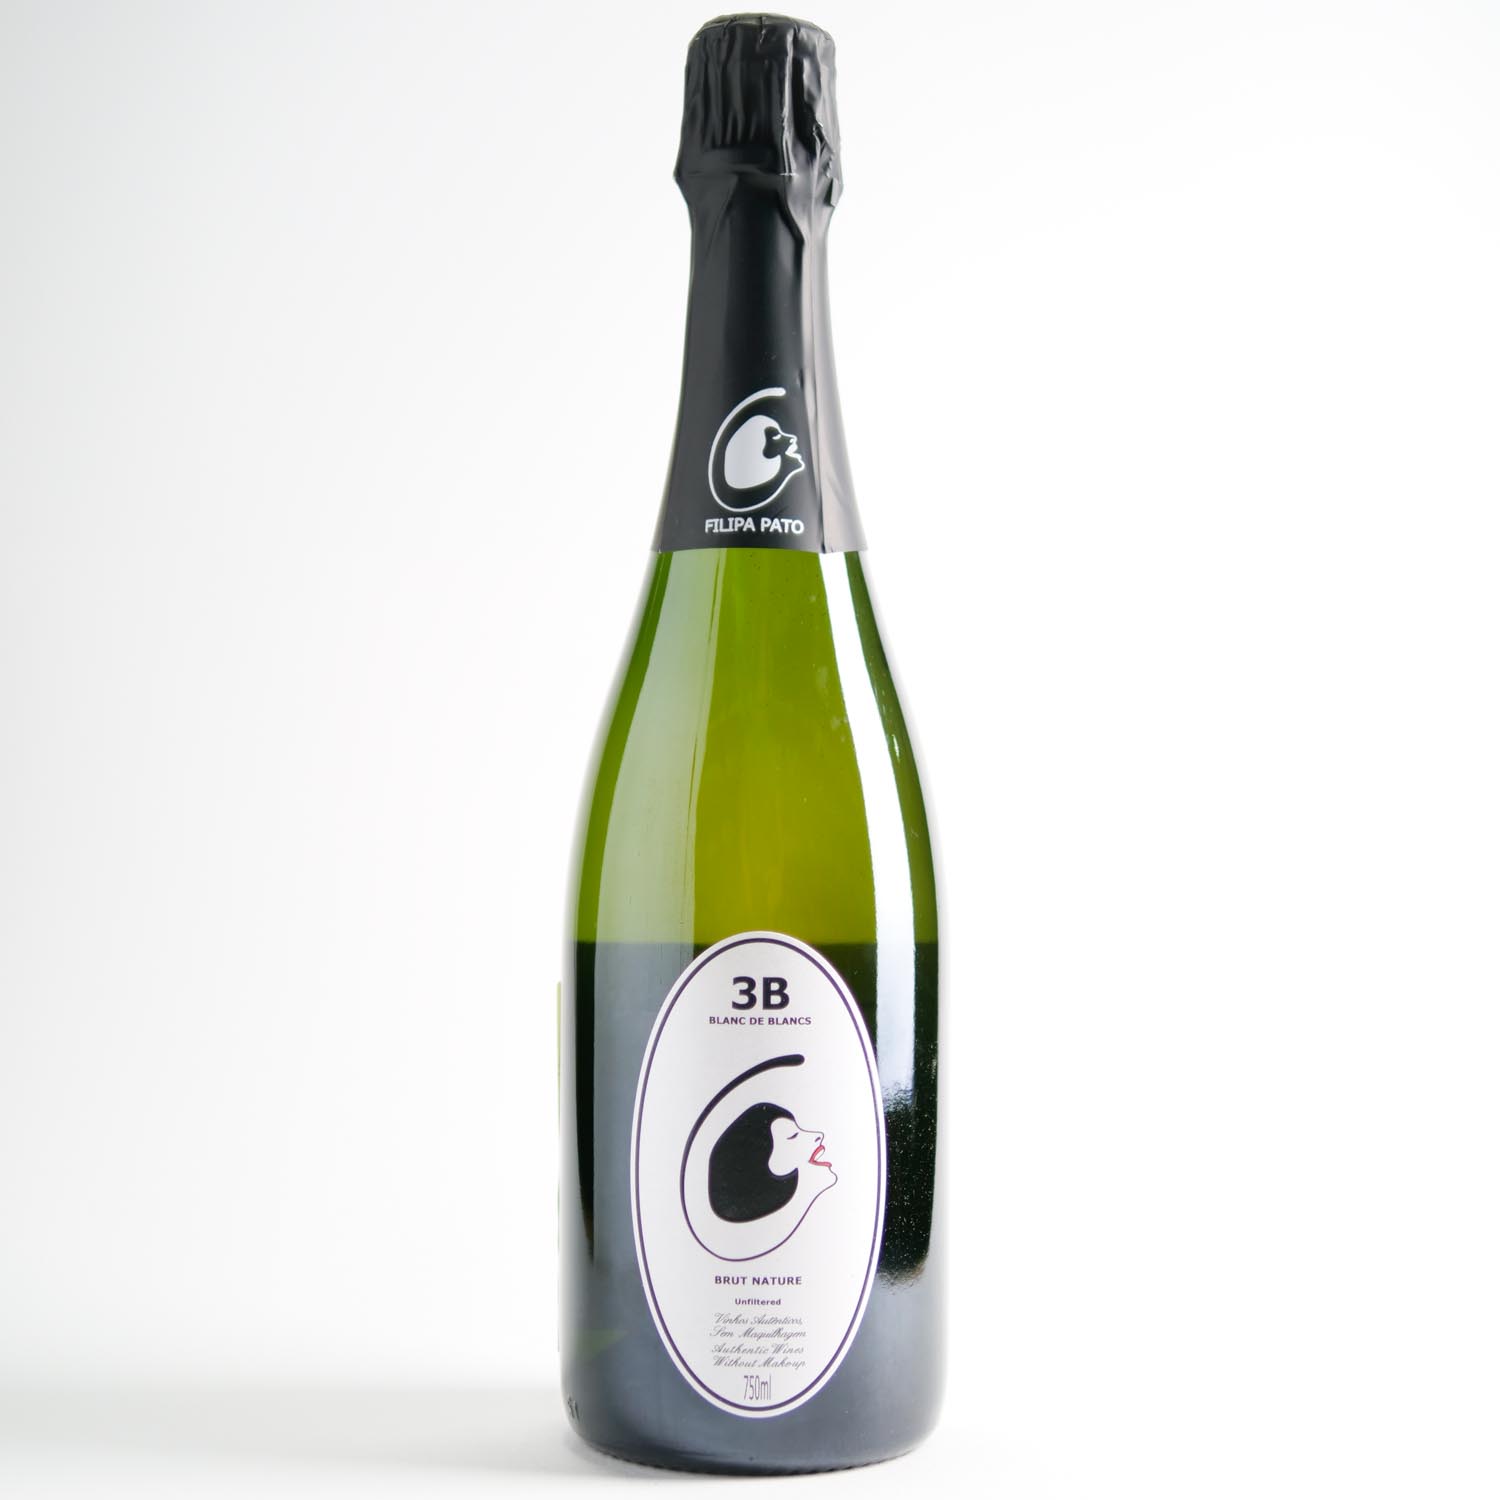 Pato and Wouters 3b Blanc De Blanc Brut Nv